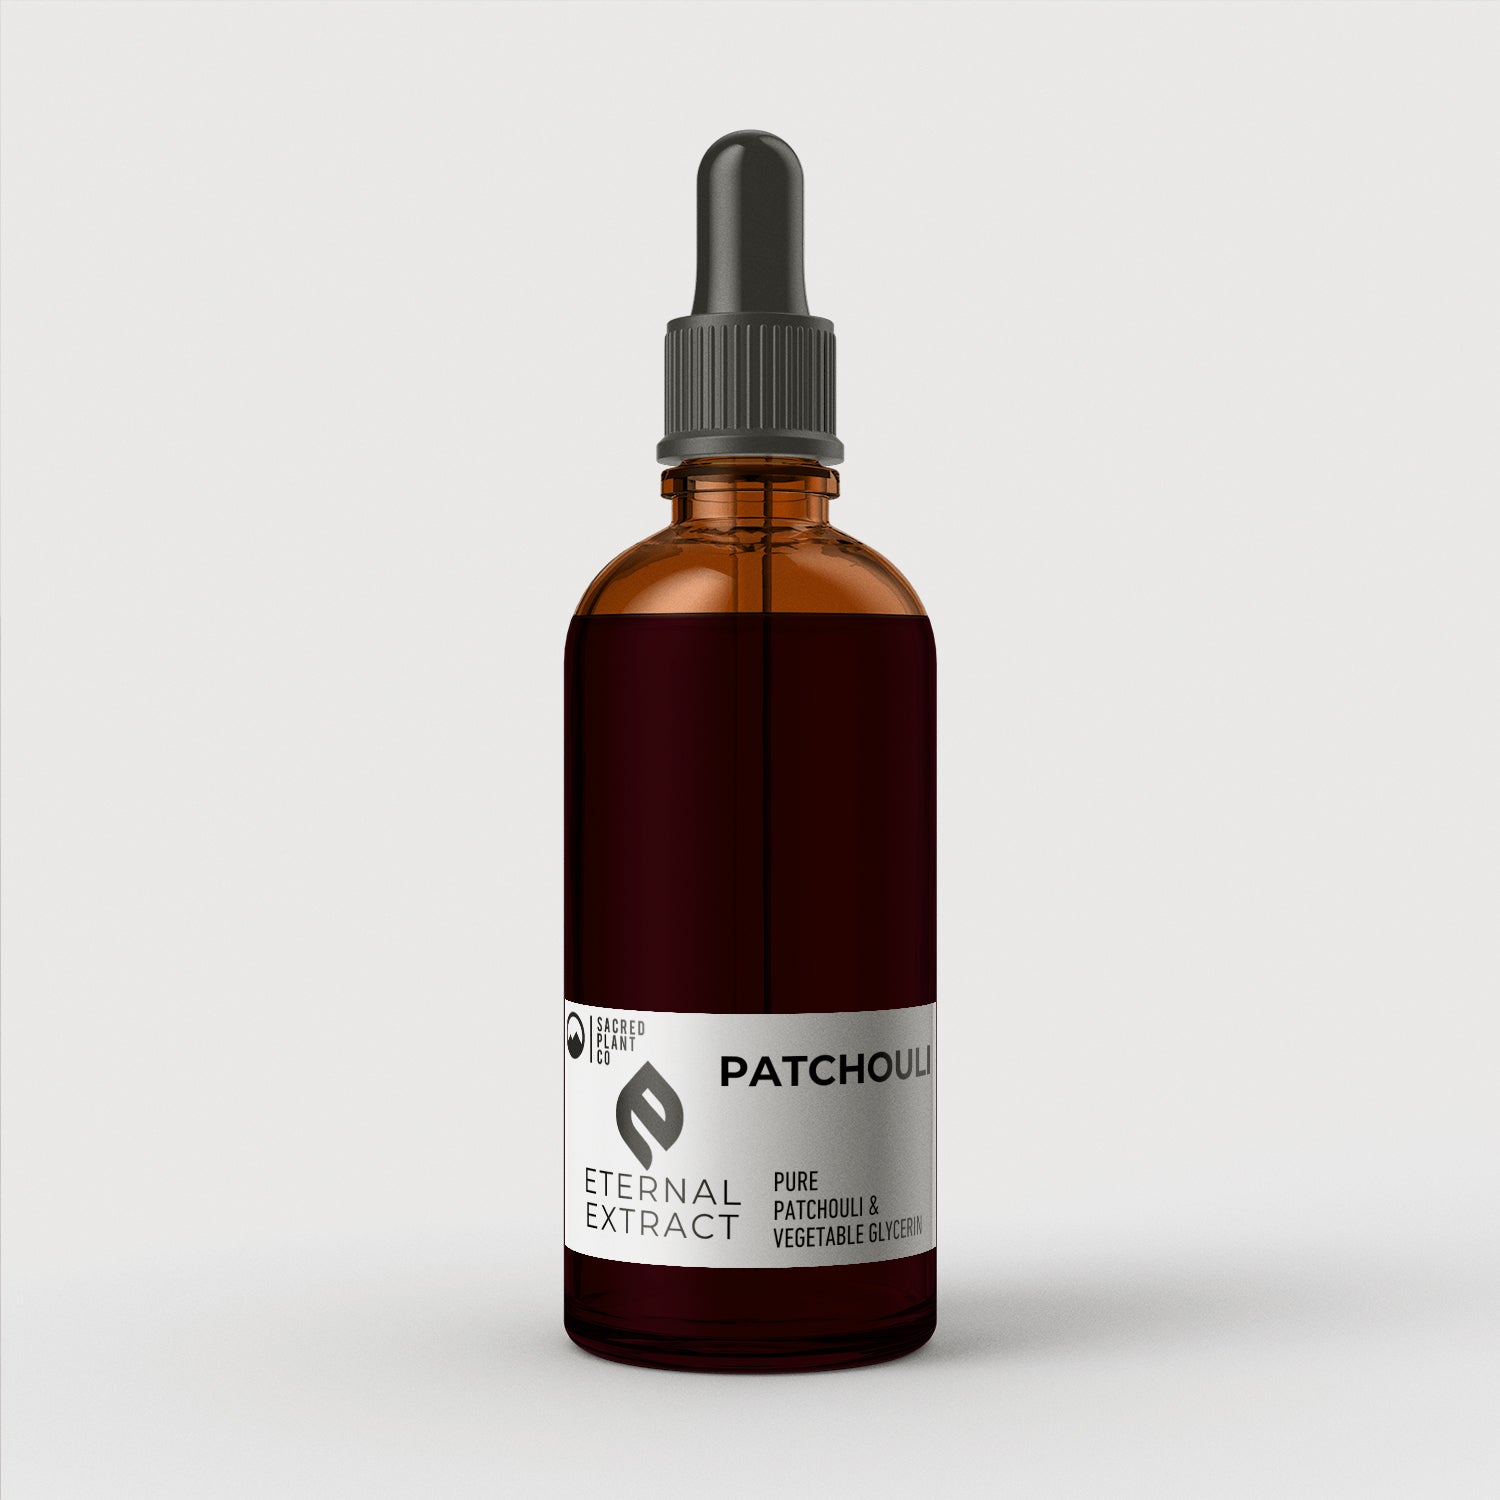 Premium Sacred Plant Co Patchouli Eternal Extract, crafted for holistic wellness and natural skincare, presented in a classic dropper bottle.